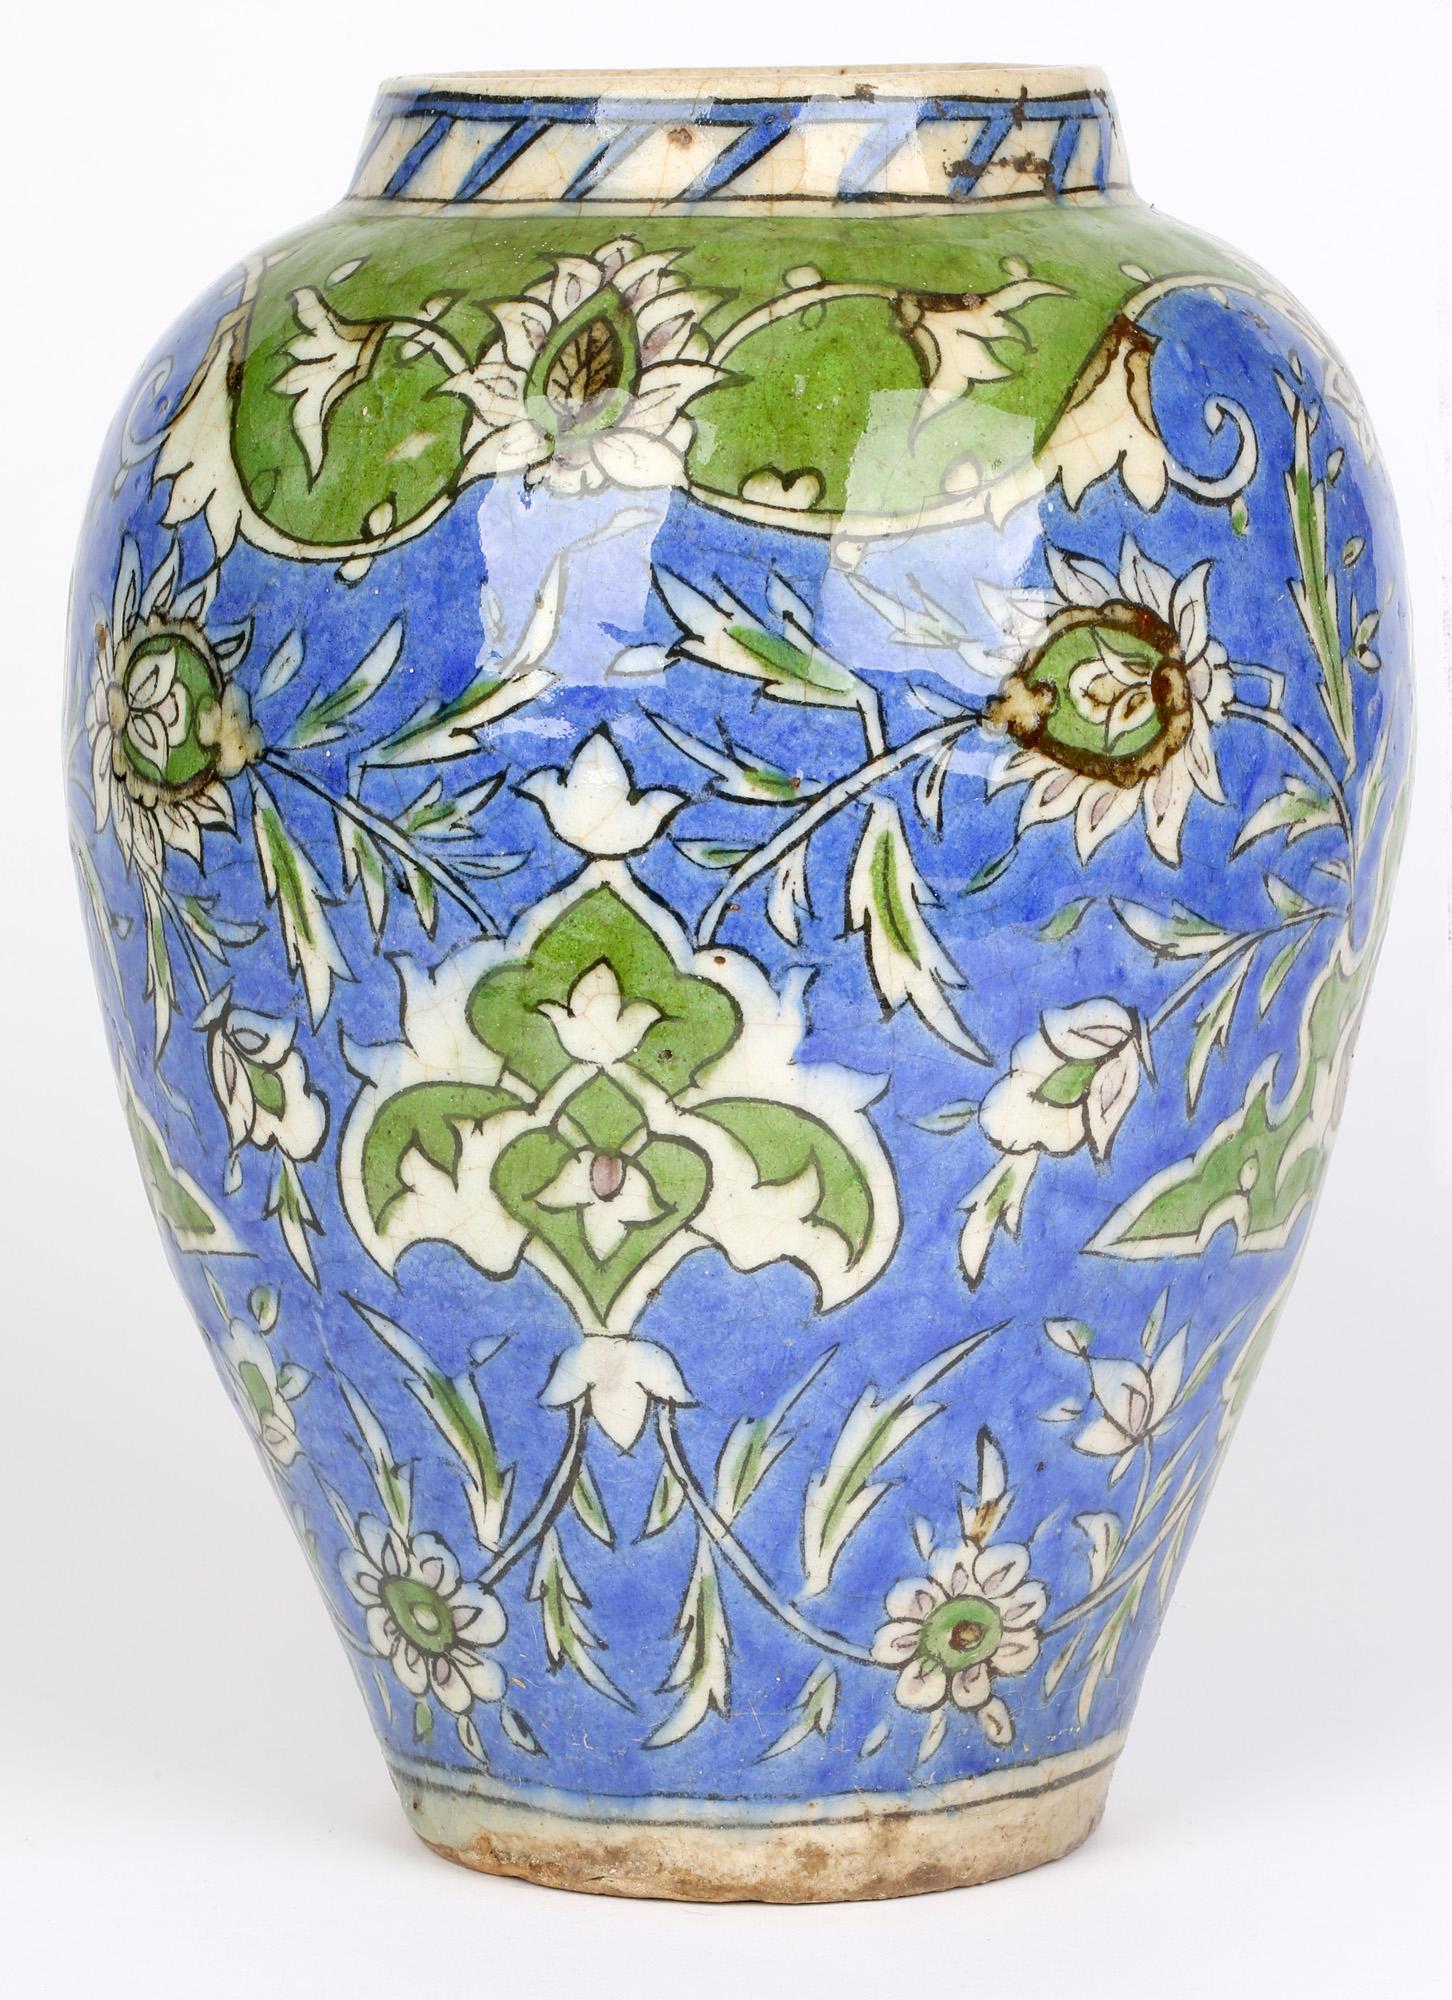 Large Persian Islamic styled hand painted floral pottery vase dating from the 19th century. The large earthenware vase is of rounded bulbous shape standing on a narrow unglazed foot rim. The body is hand painted in tones of blue, green and brown